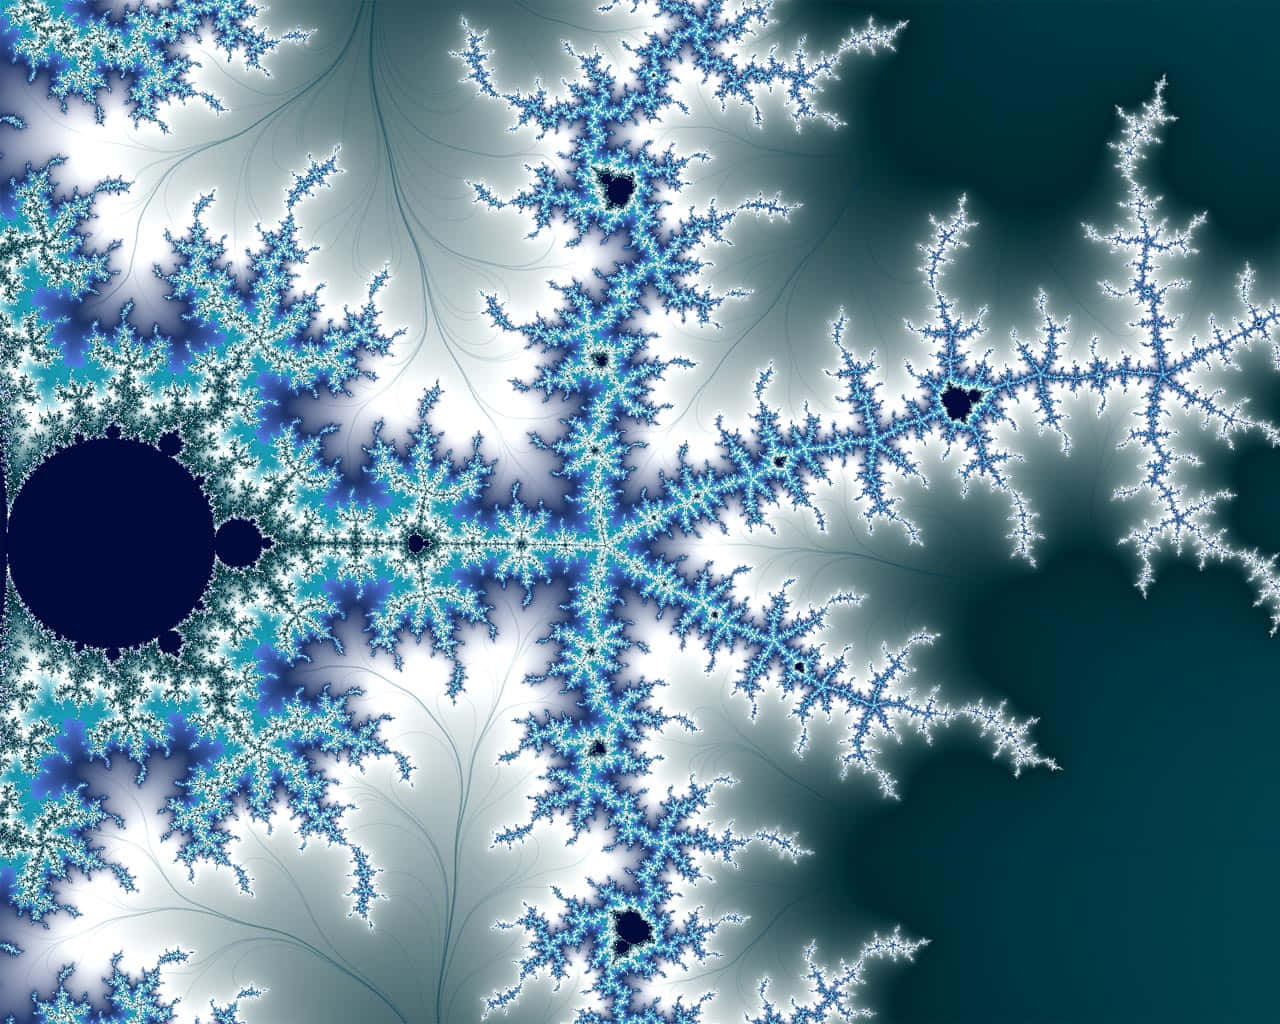 A Blue And White Snowflake With A Blue Background